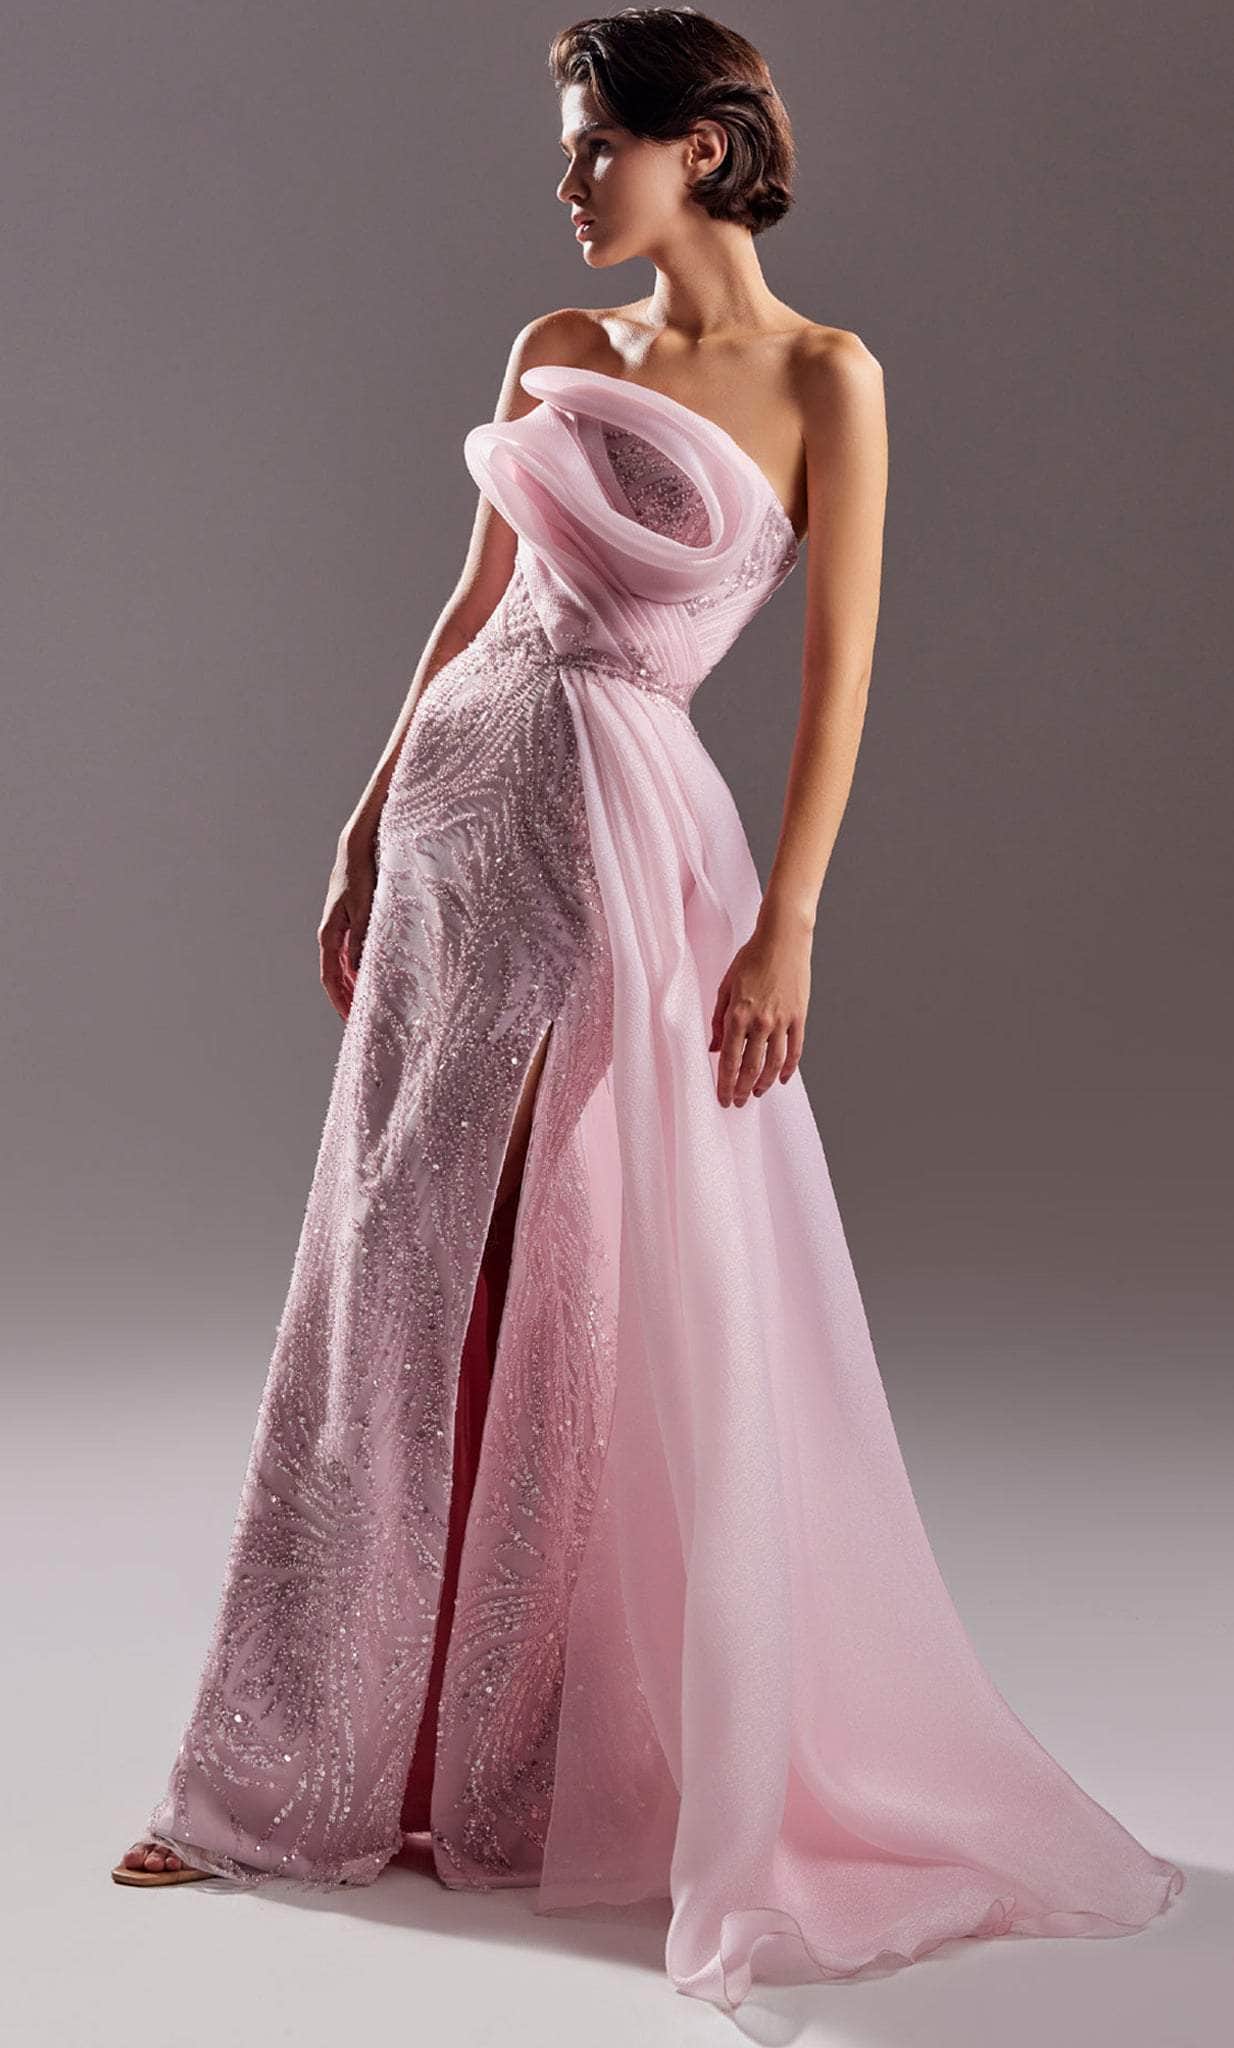 Image of MNM Couture G1524 - Embellished Strapless Prom Gown